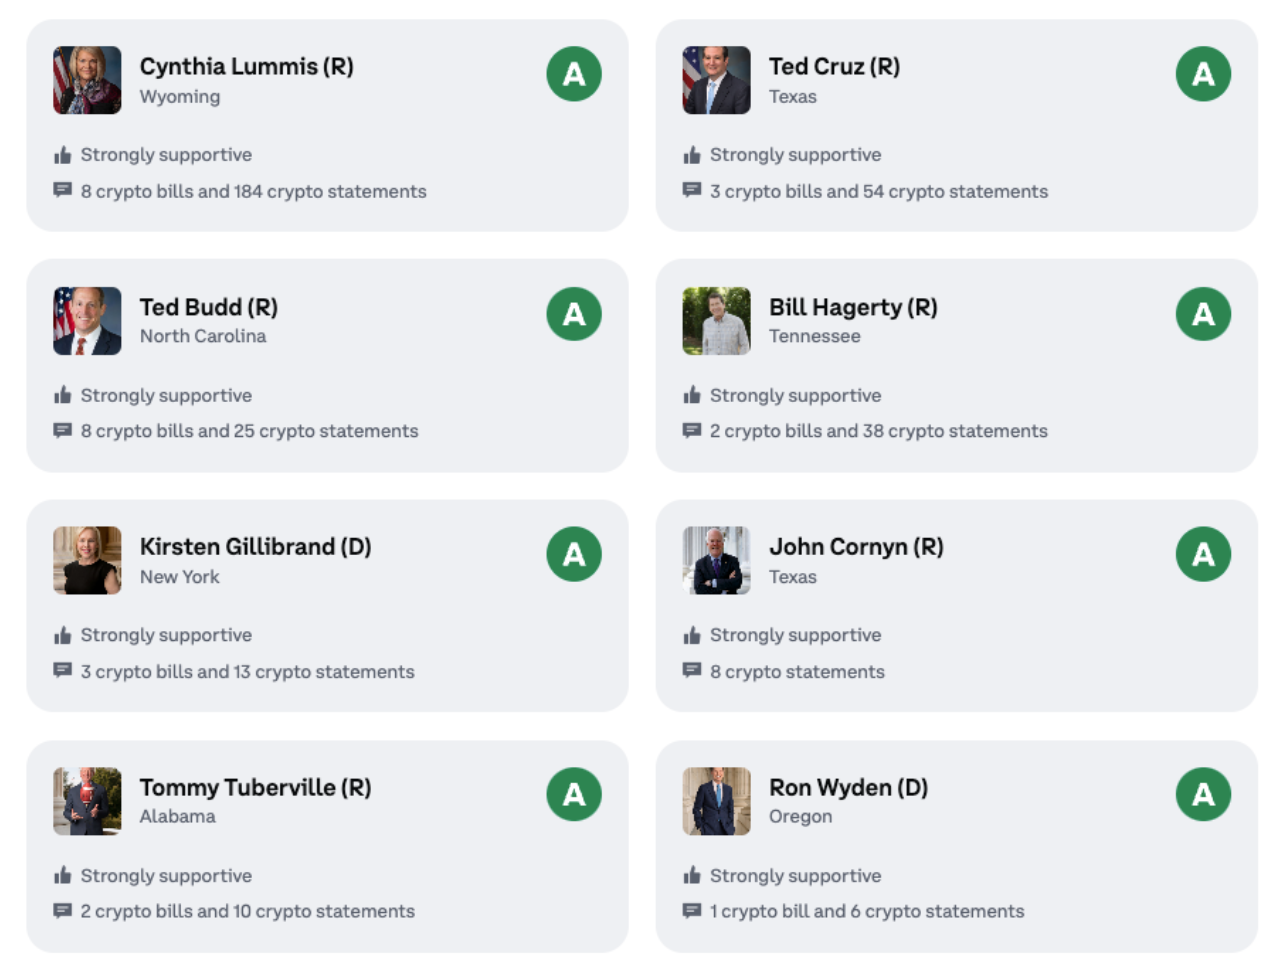 18 senators now “stand with crypto” — 14 of which are Republican. Source: Stand with Crypto